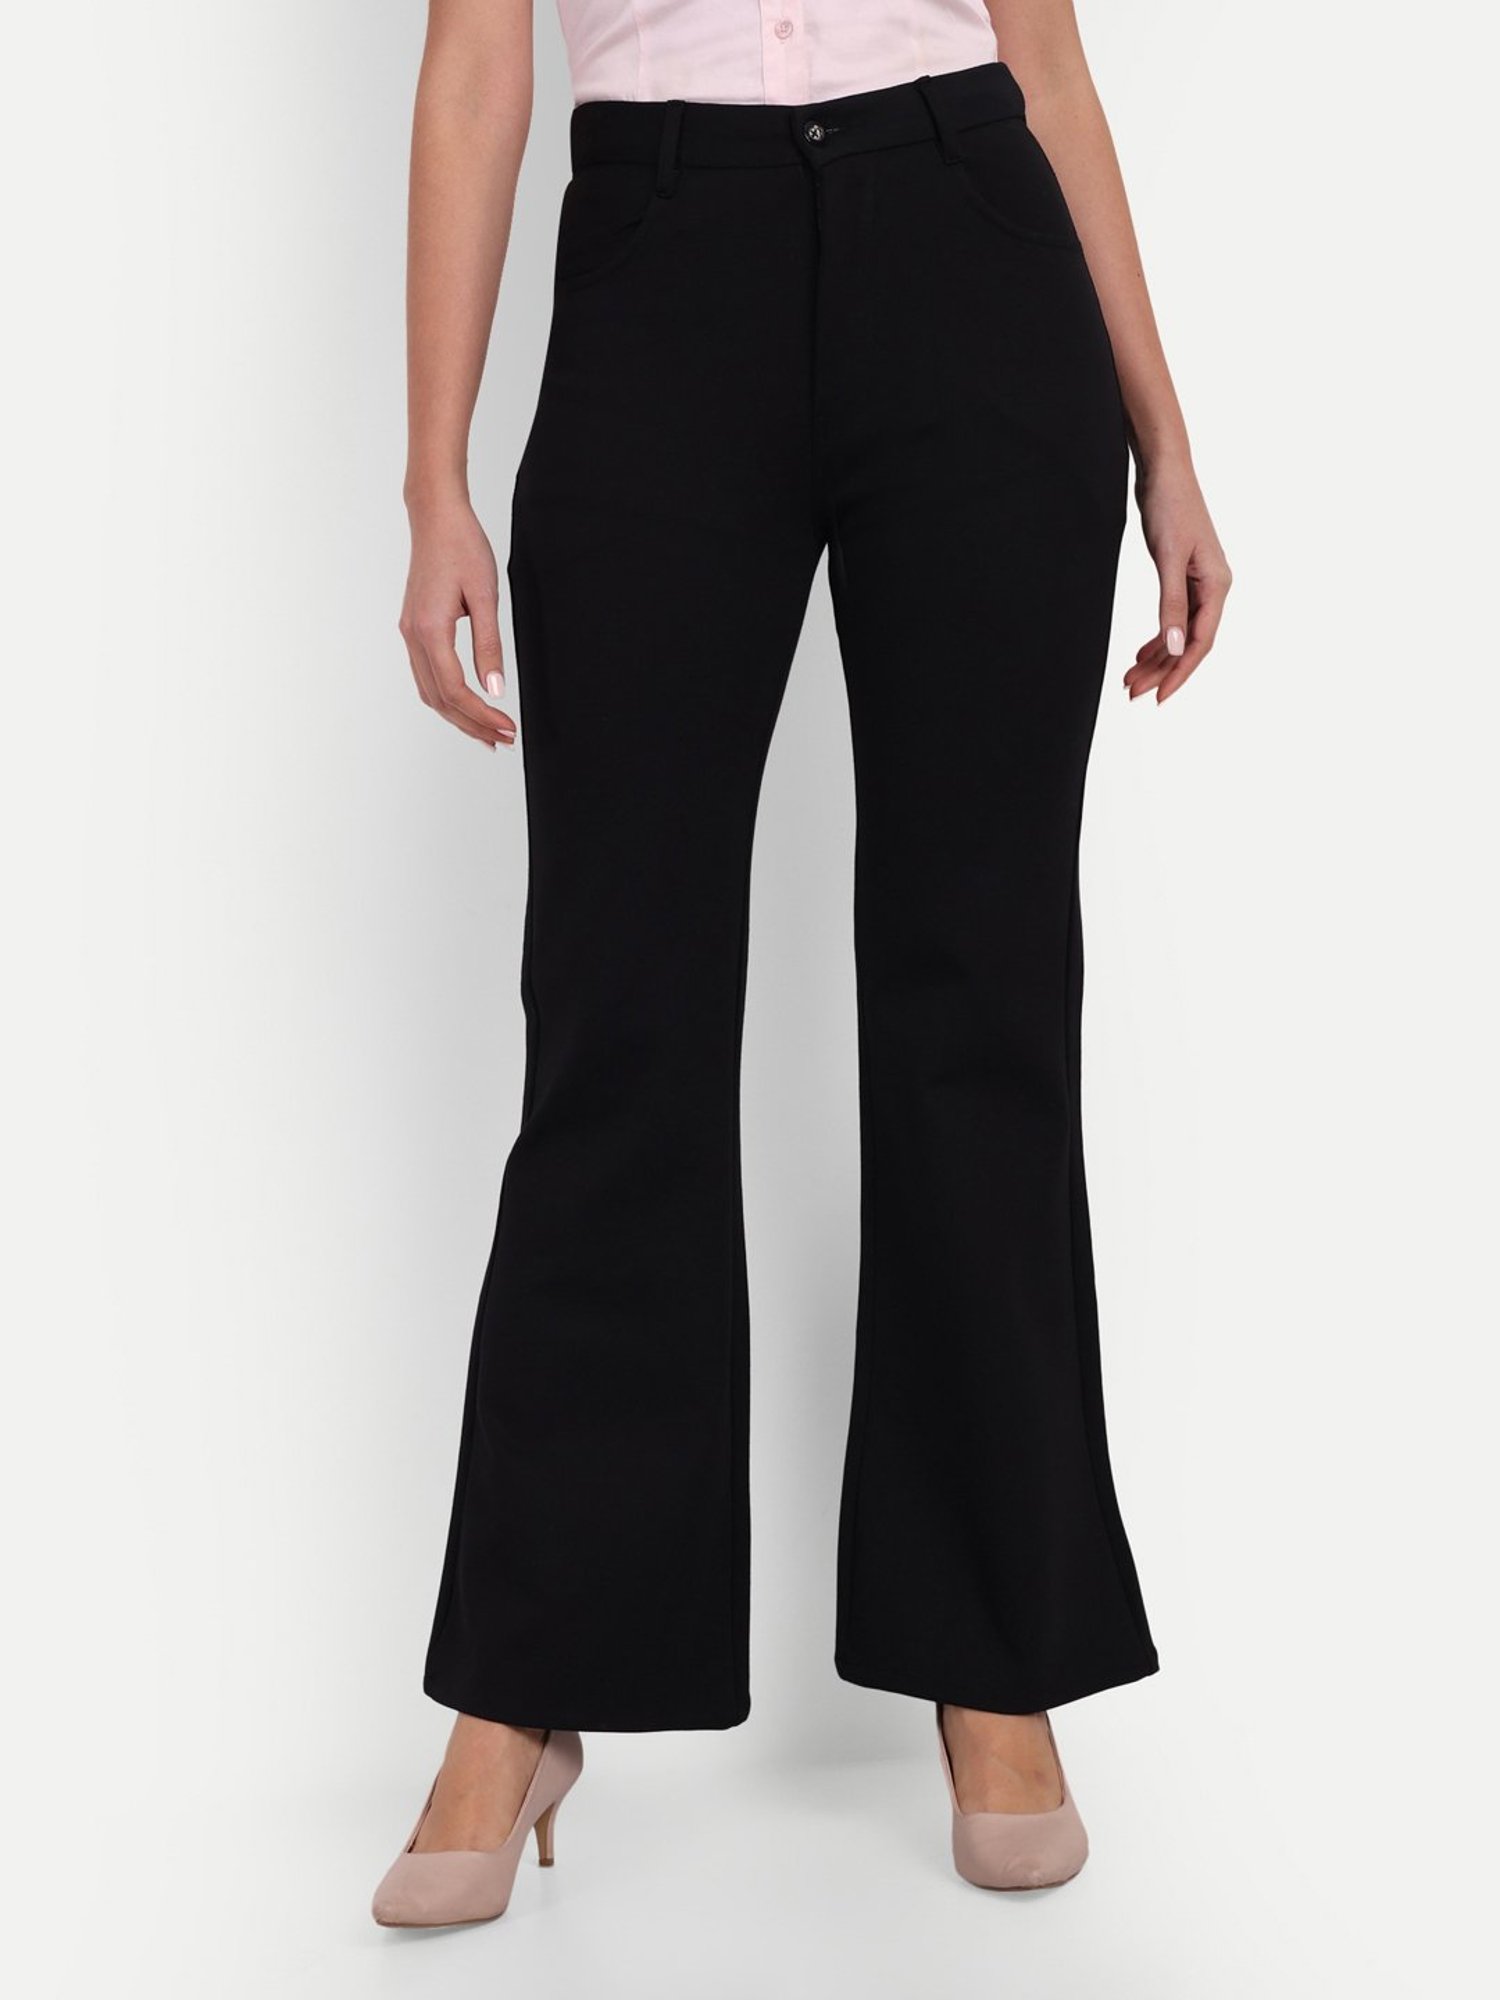 Lace flared trousers - Black - Ladies | H&M